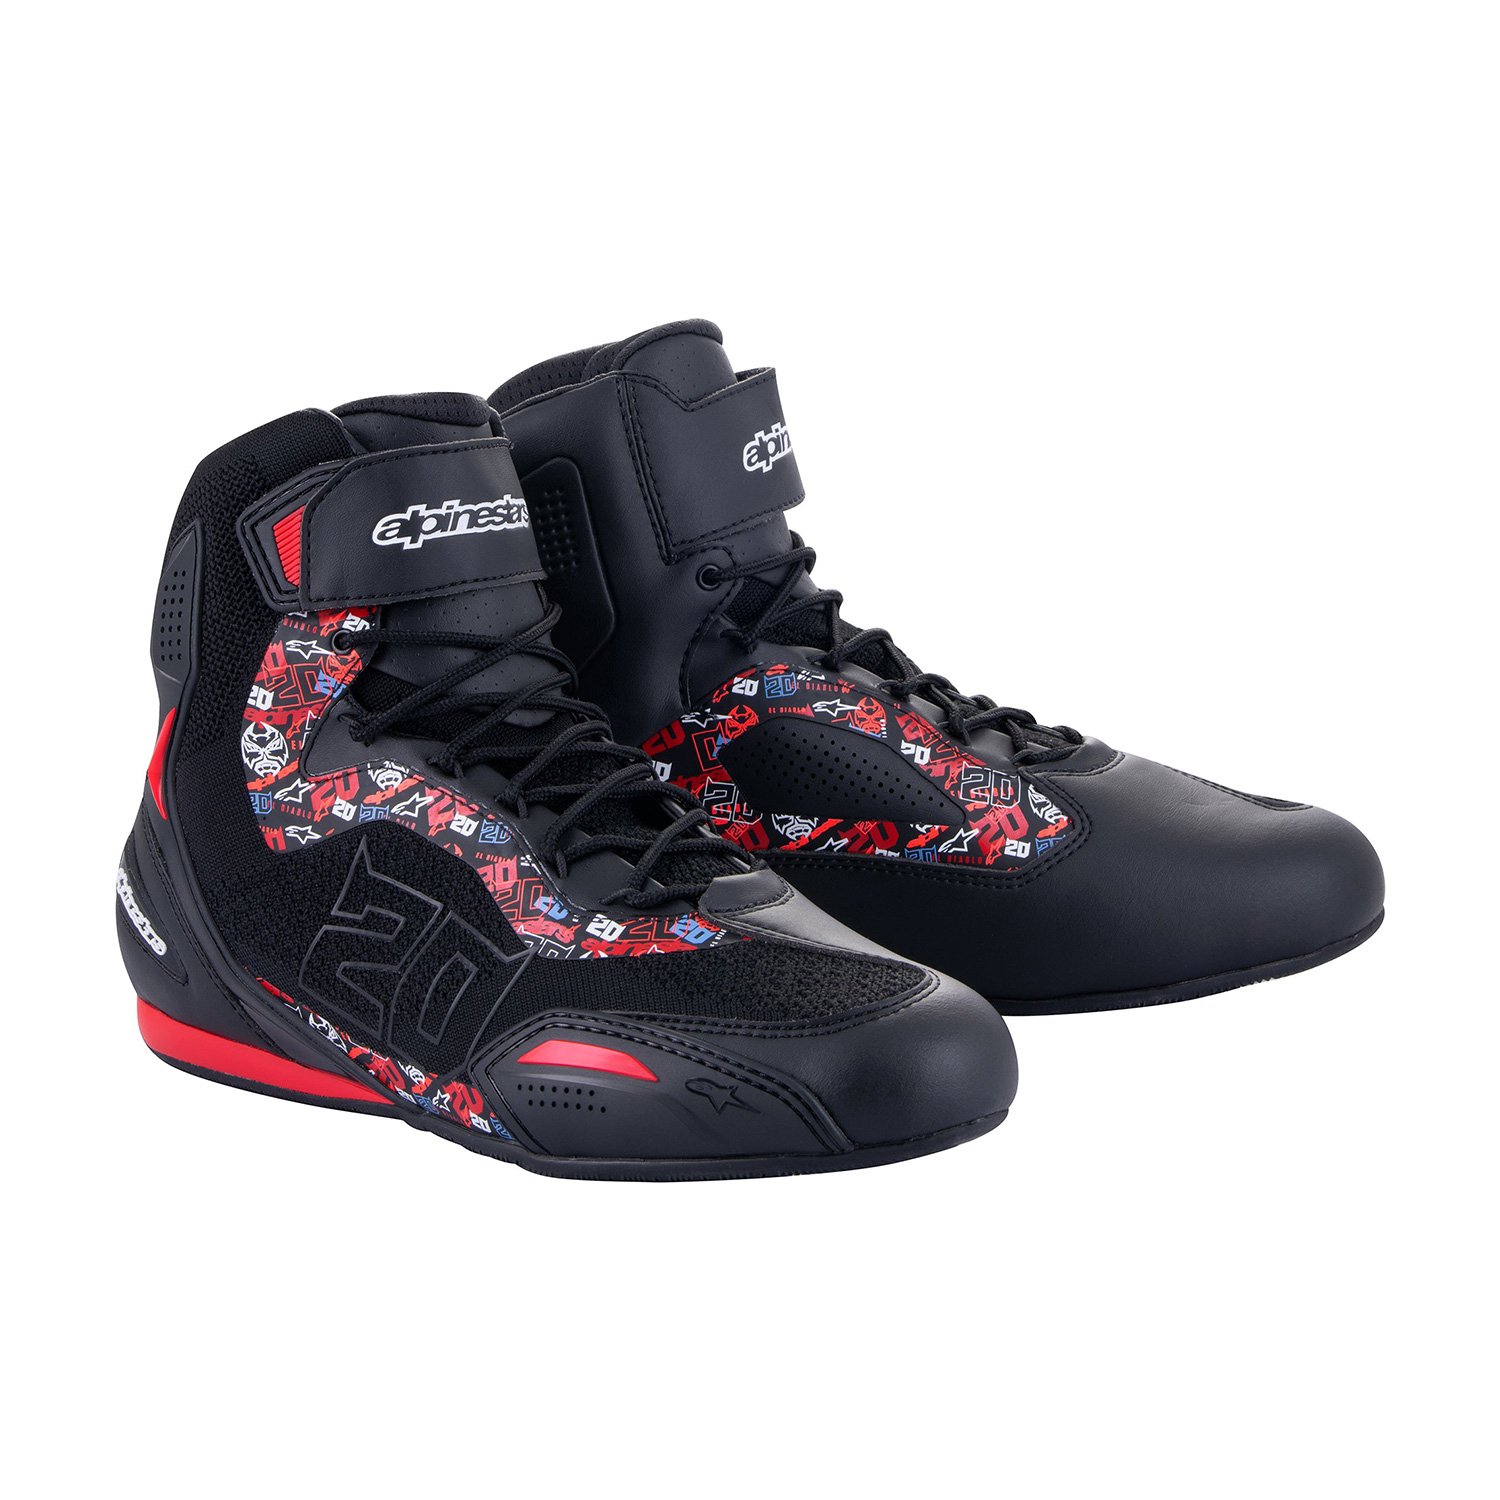 Image of Alpinestars FQ20 Faster-3 Rideknit Noir Bright Rouge Chaussures Taille US 75